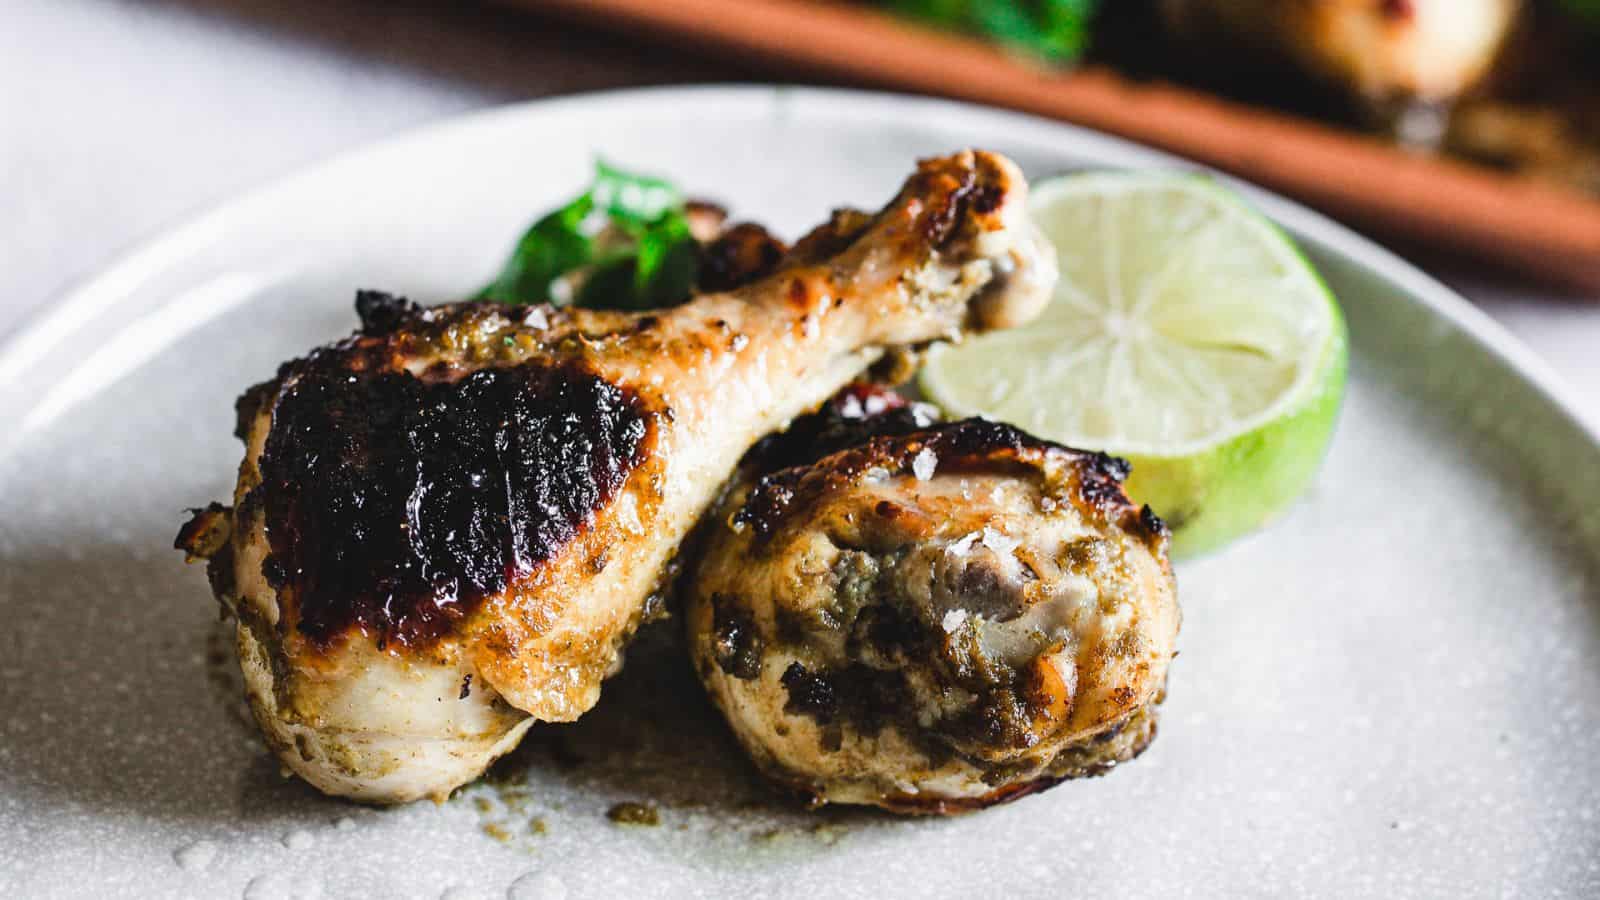 Grilled chicken drumsticks on a plate with a slice of lime, inspired by Grandma's Secret Chicken Recipes.